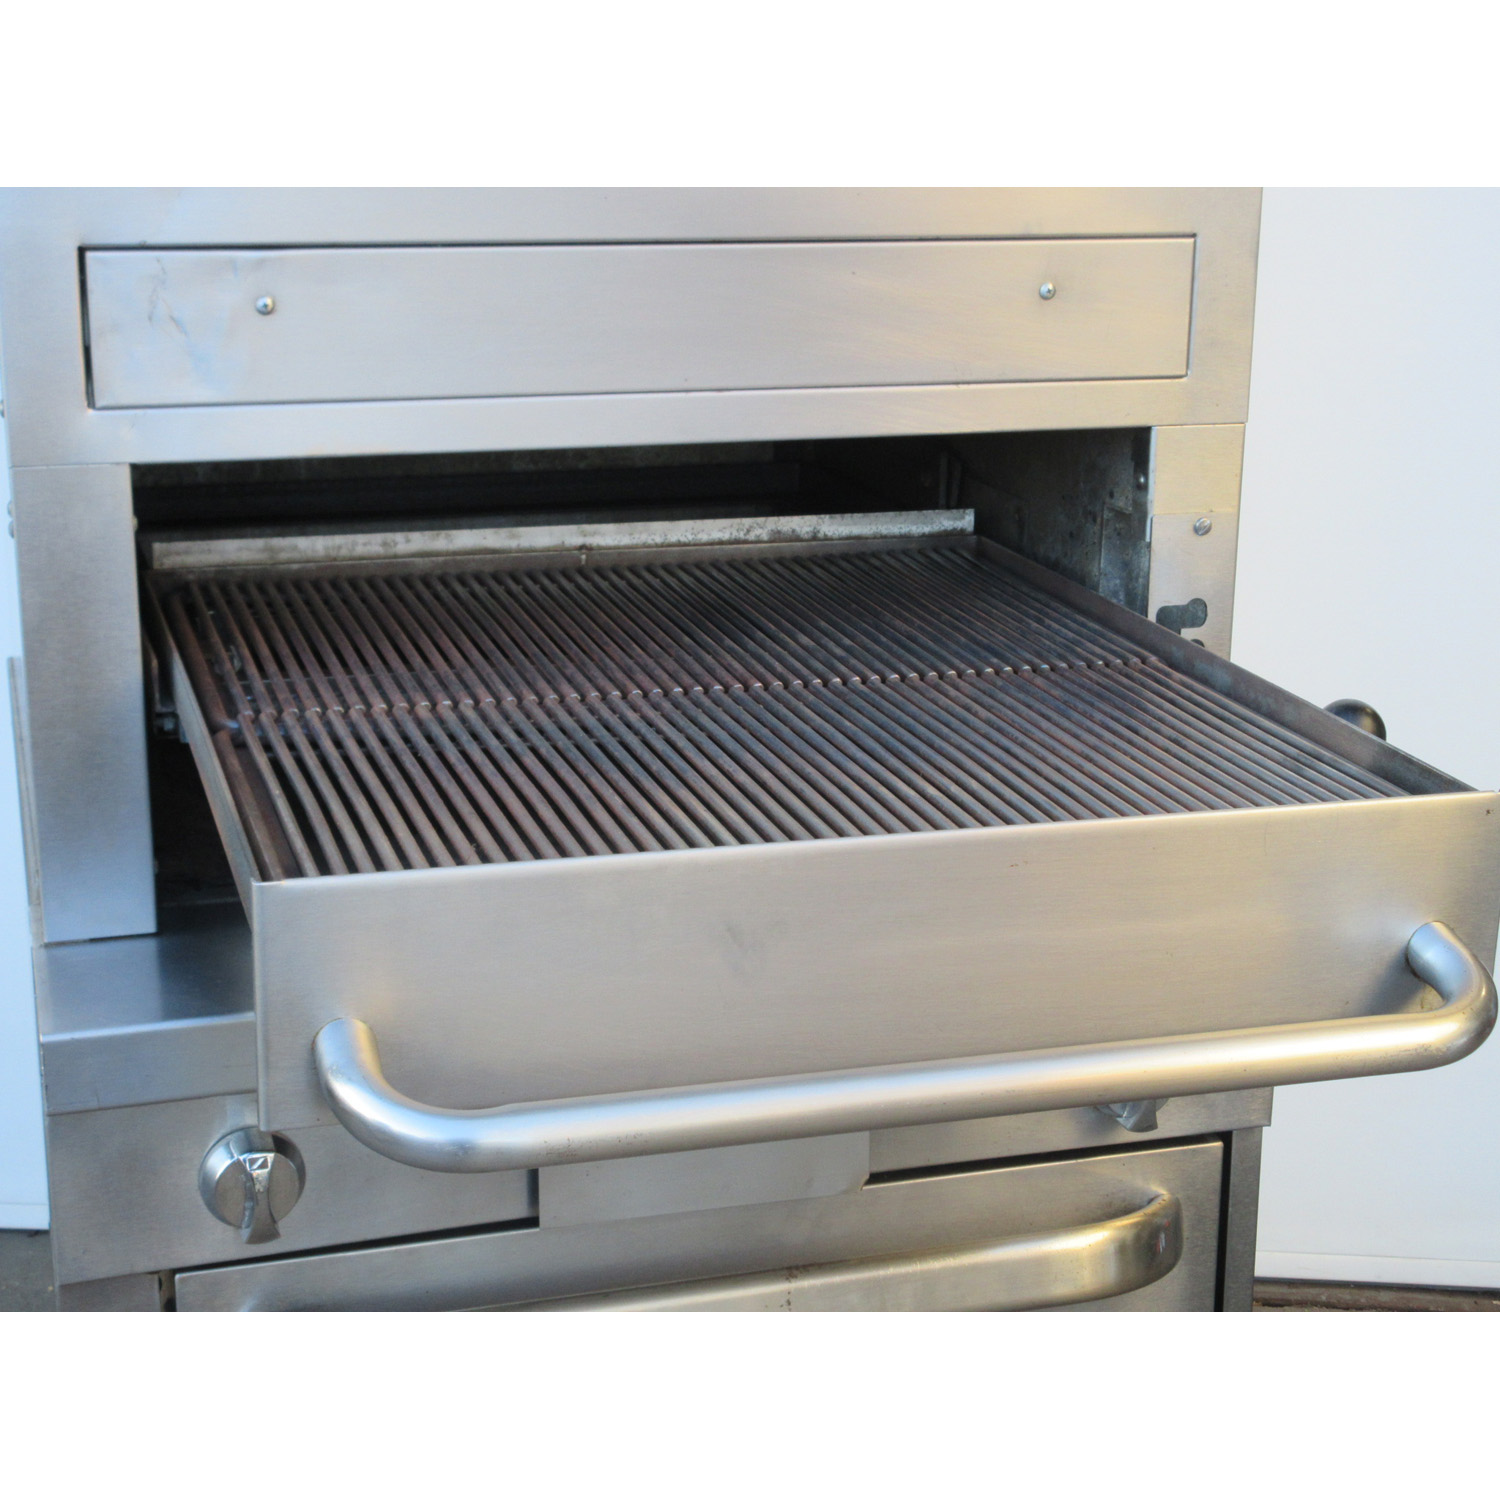 Southbend P32A-3240 Broiler with Convection Oven, Gas, Used Excellent Condition image 3